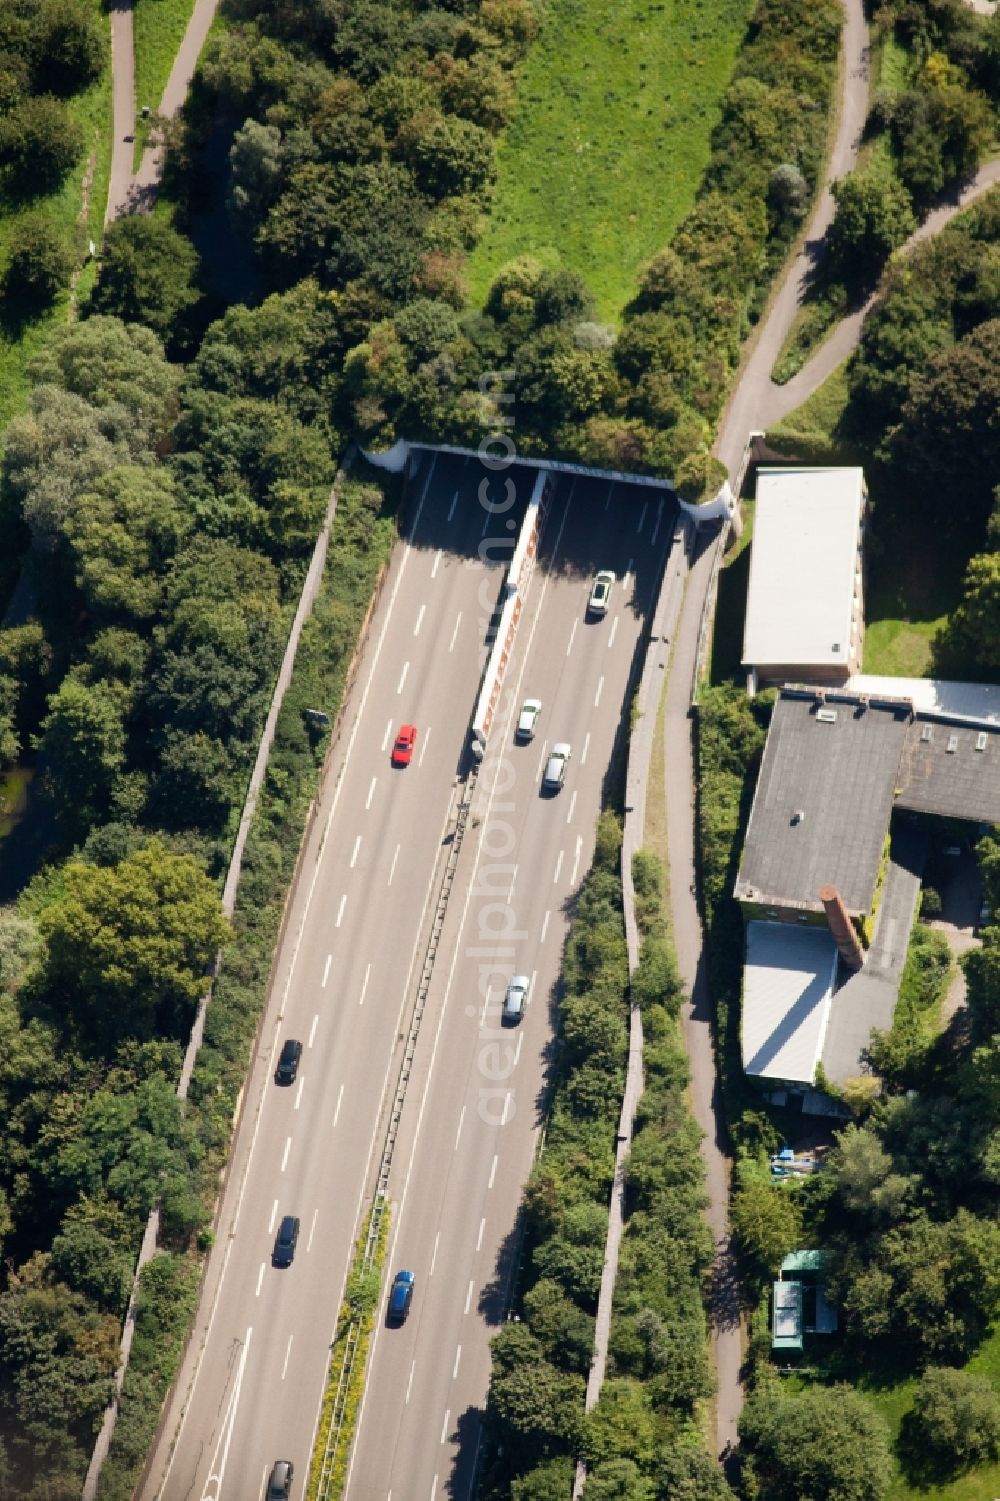 Karlsruhe from above - Entry and exit area of Edeltrud Tunnel in the district Beiertheim - Bulach in Karlsruhe in the state Baden-Wuerttemberg